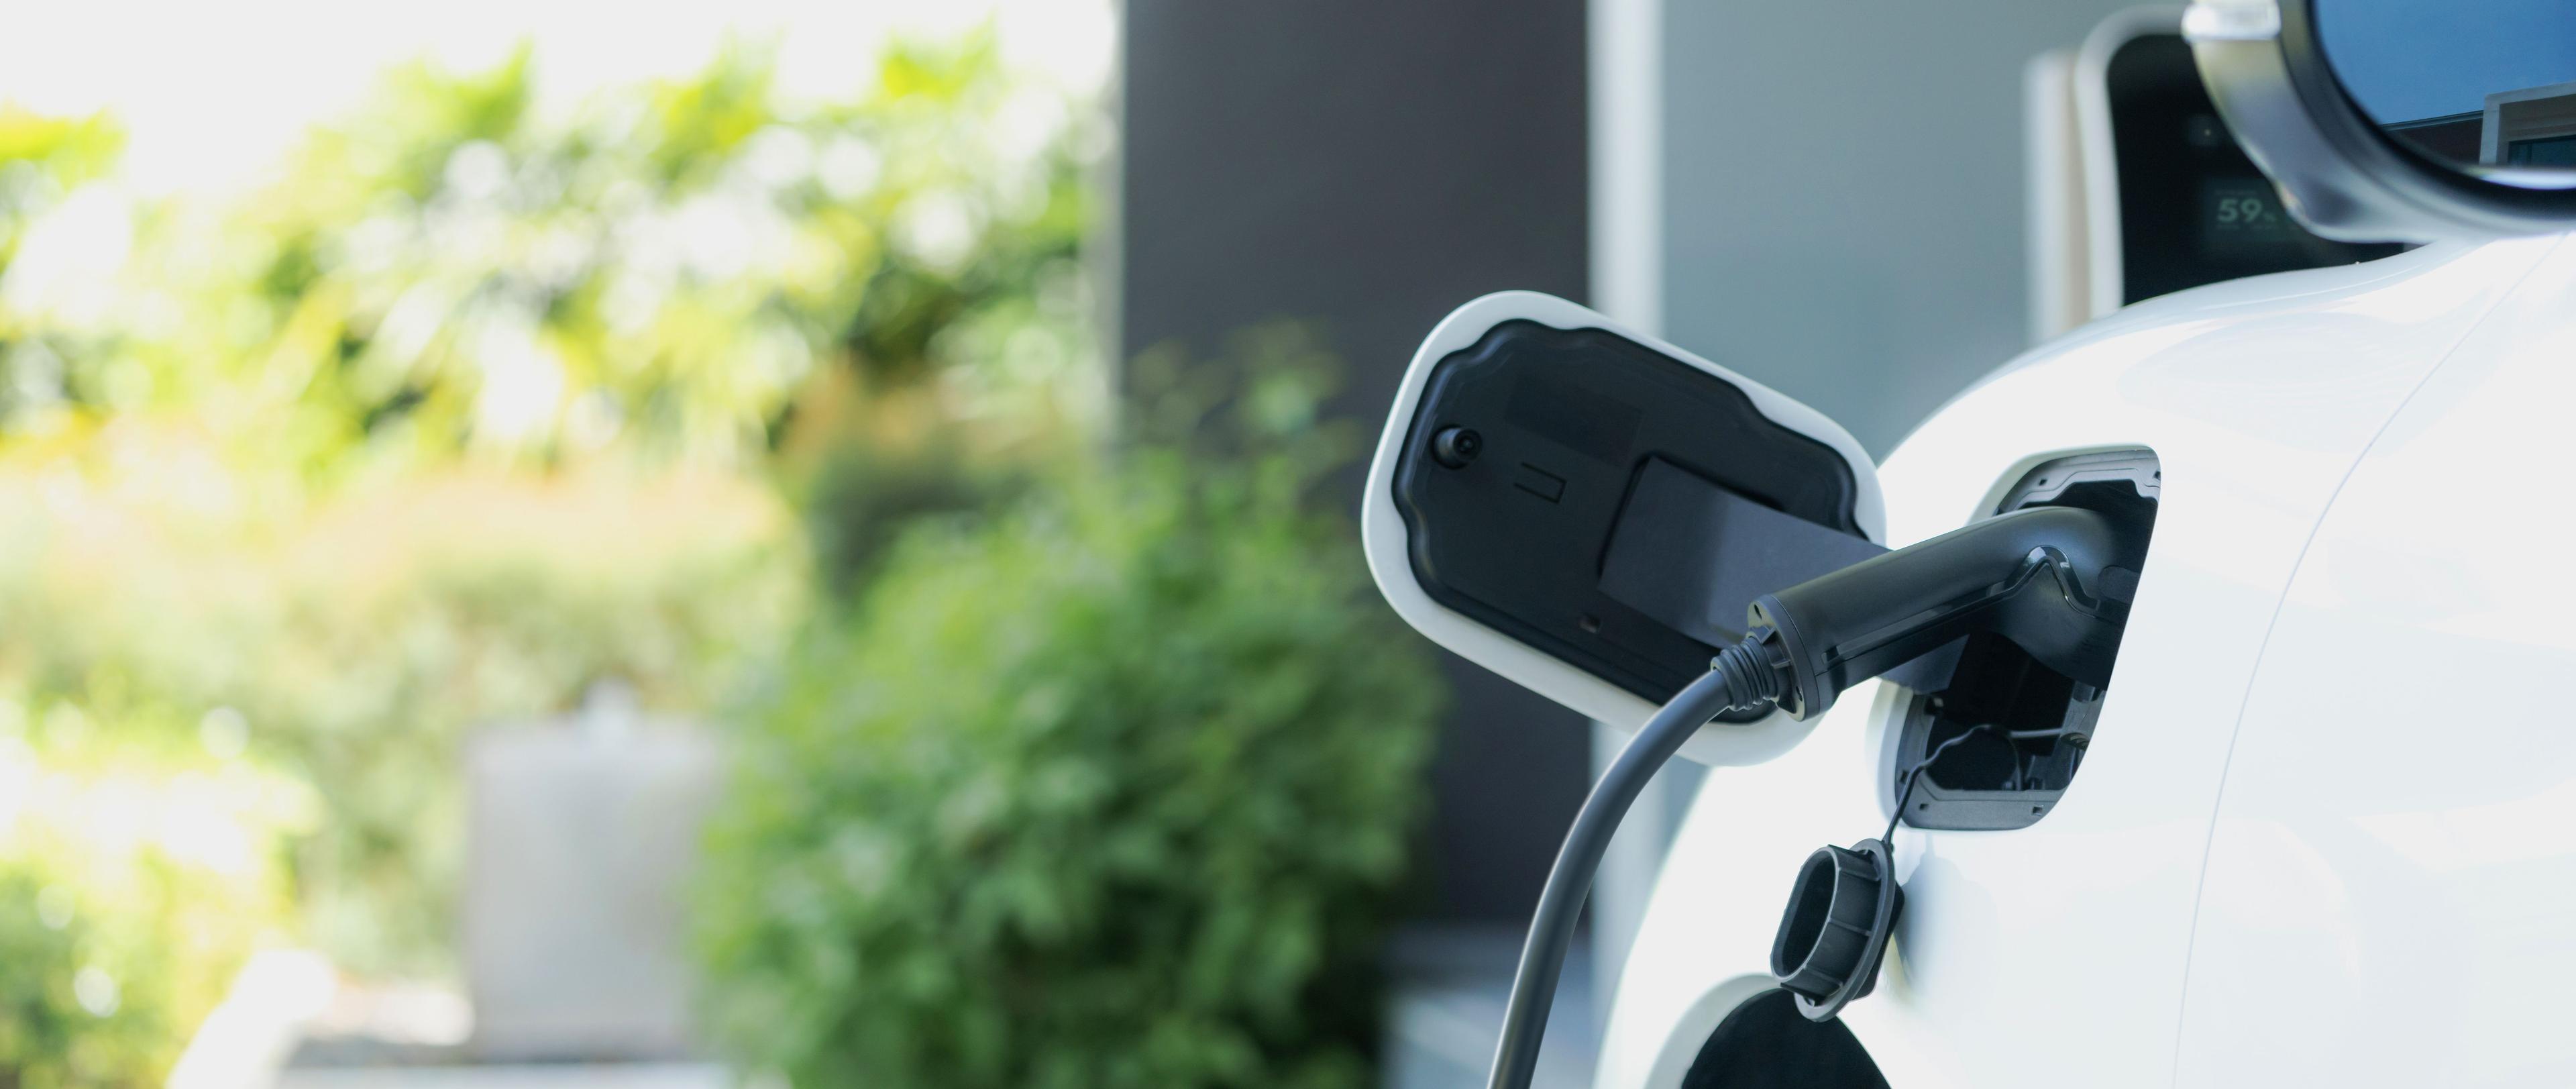 ev chargers for homes and businesses